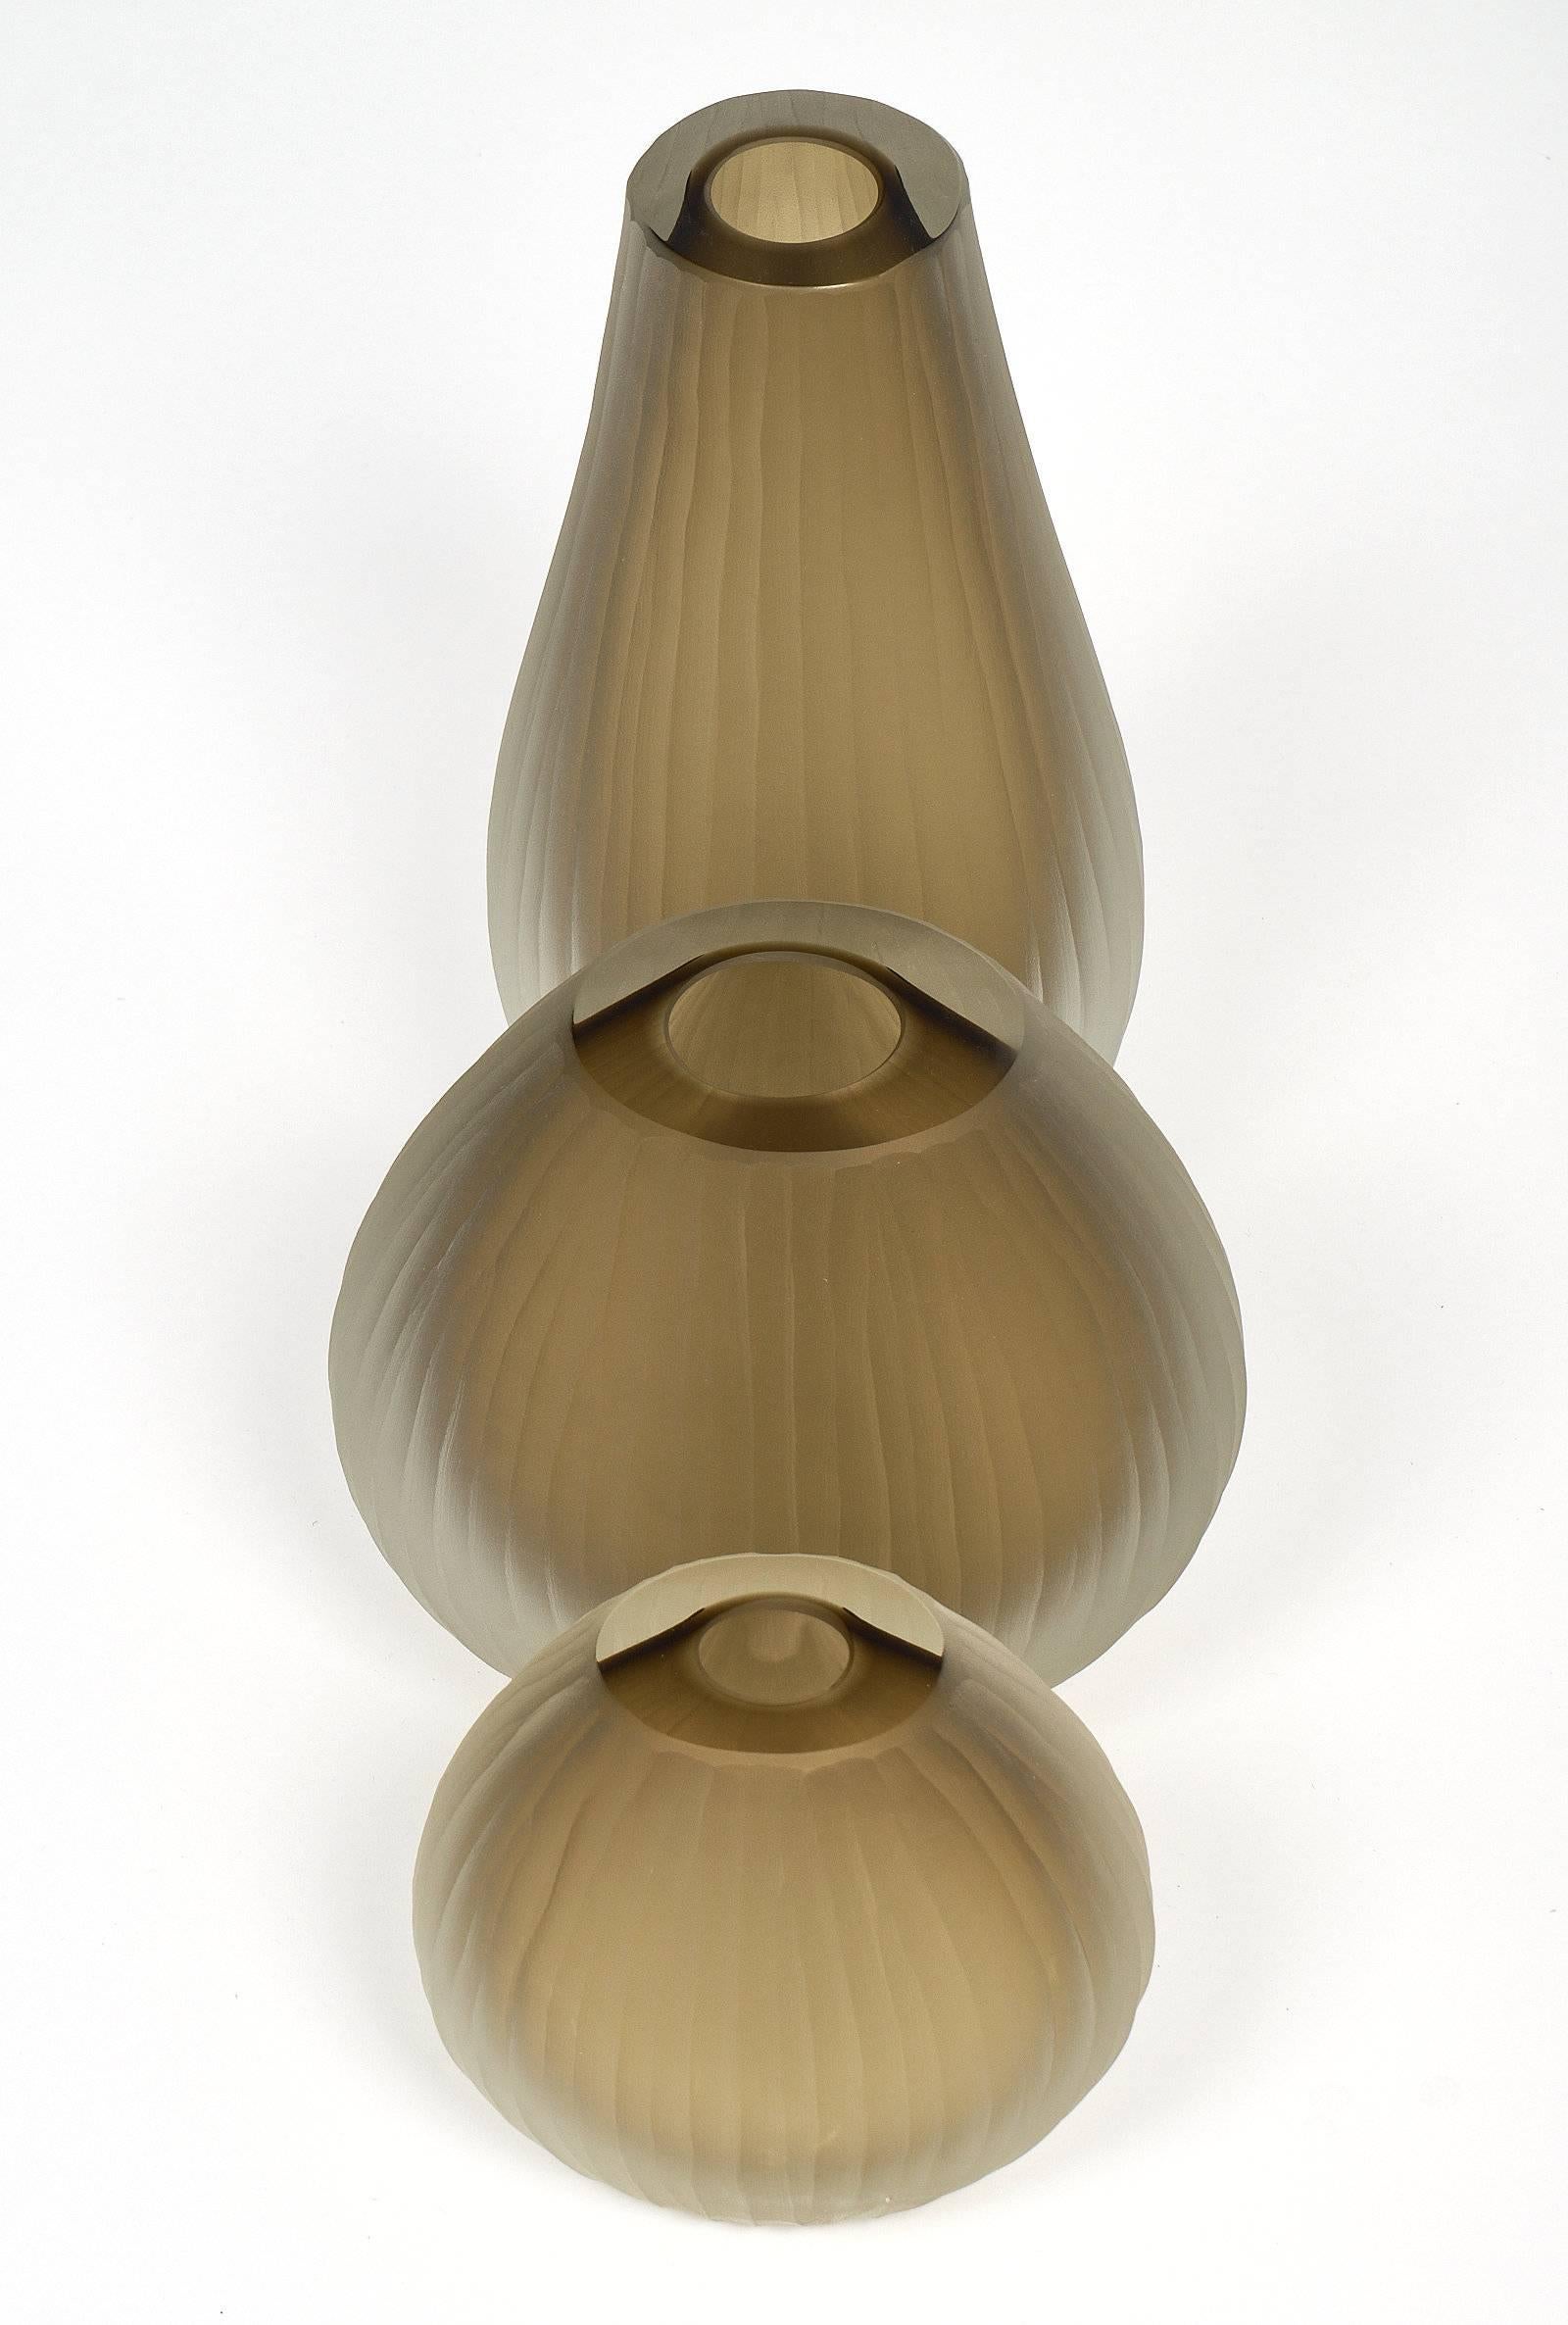 Three handblown Murano glass vases of different sizes executed in the “battuto” or “hammered,” fashion originated by Tobia Scarpa during his time at Venini in a smoke grey color. Each has a lightly textured and frosted finish. Measures: The large